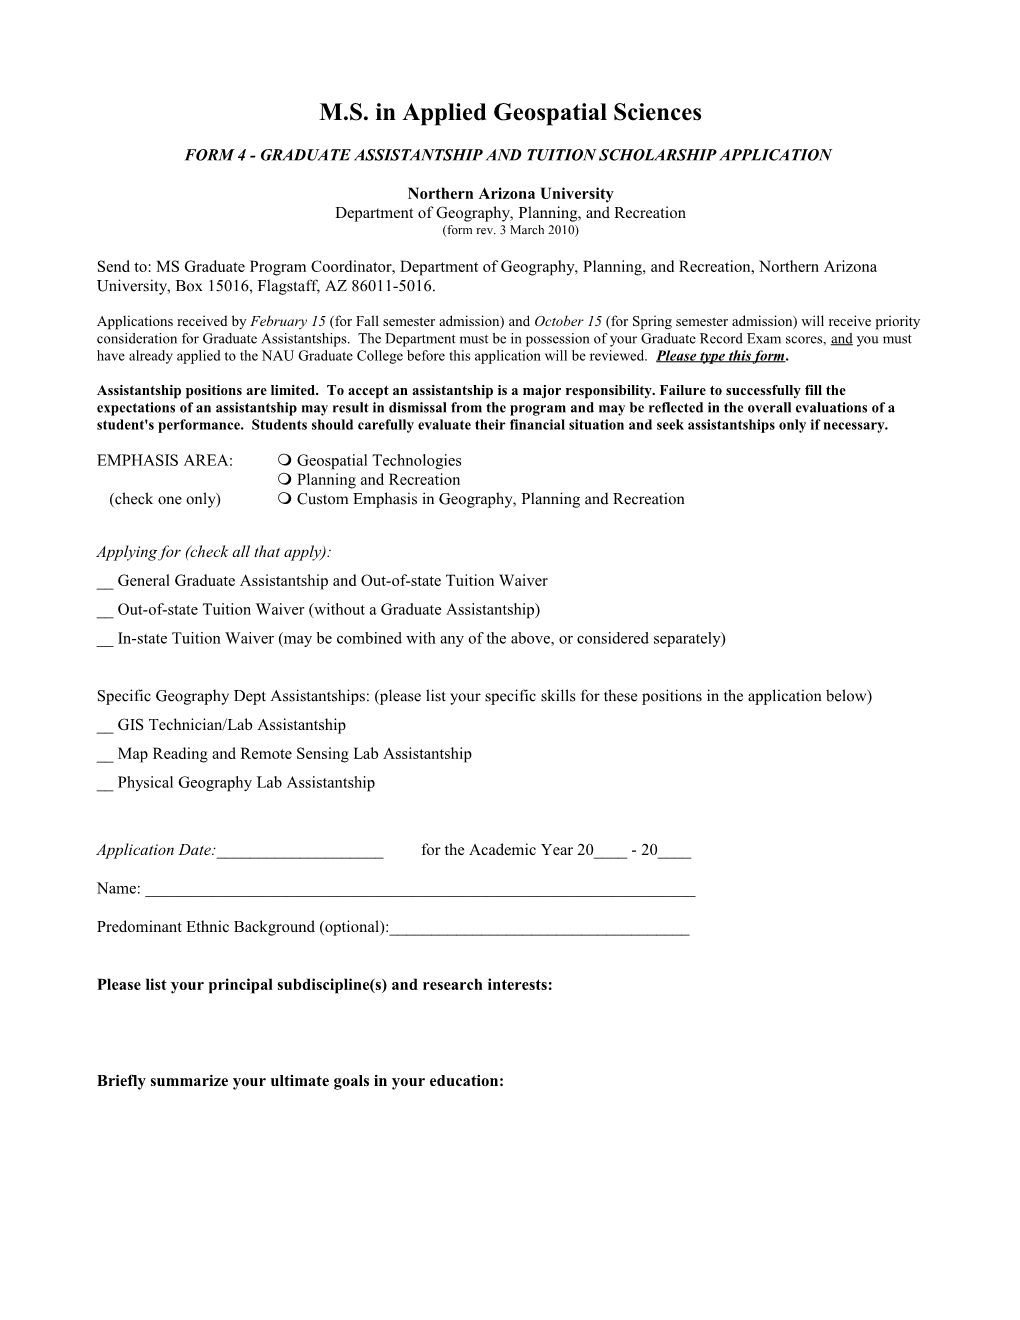 Form 4 - Graduate Assistantship and Tuition Scholarship Application